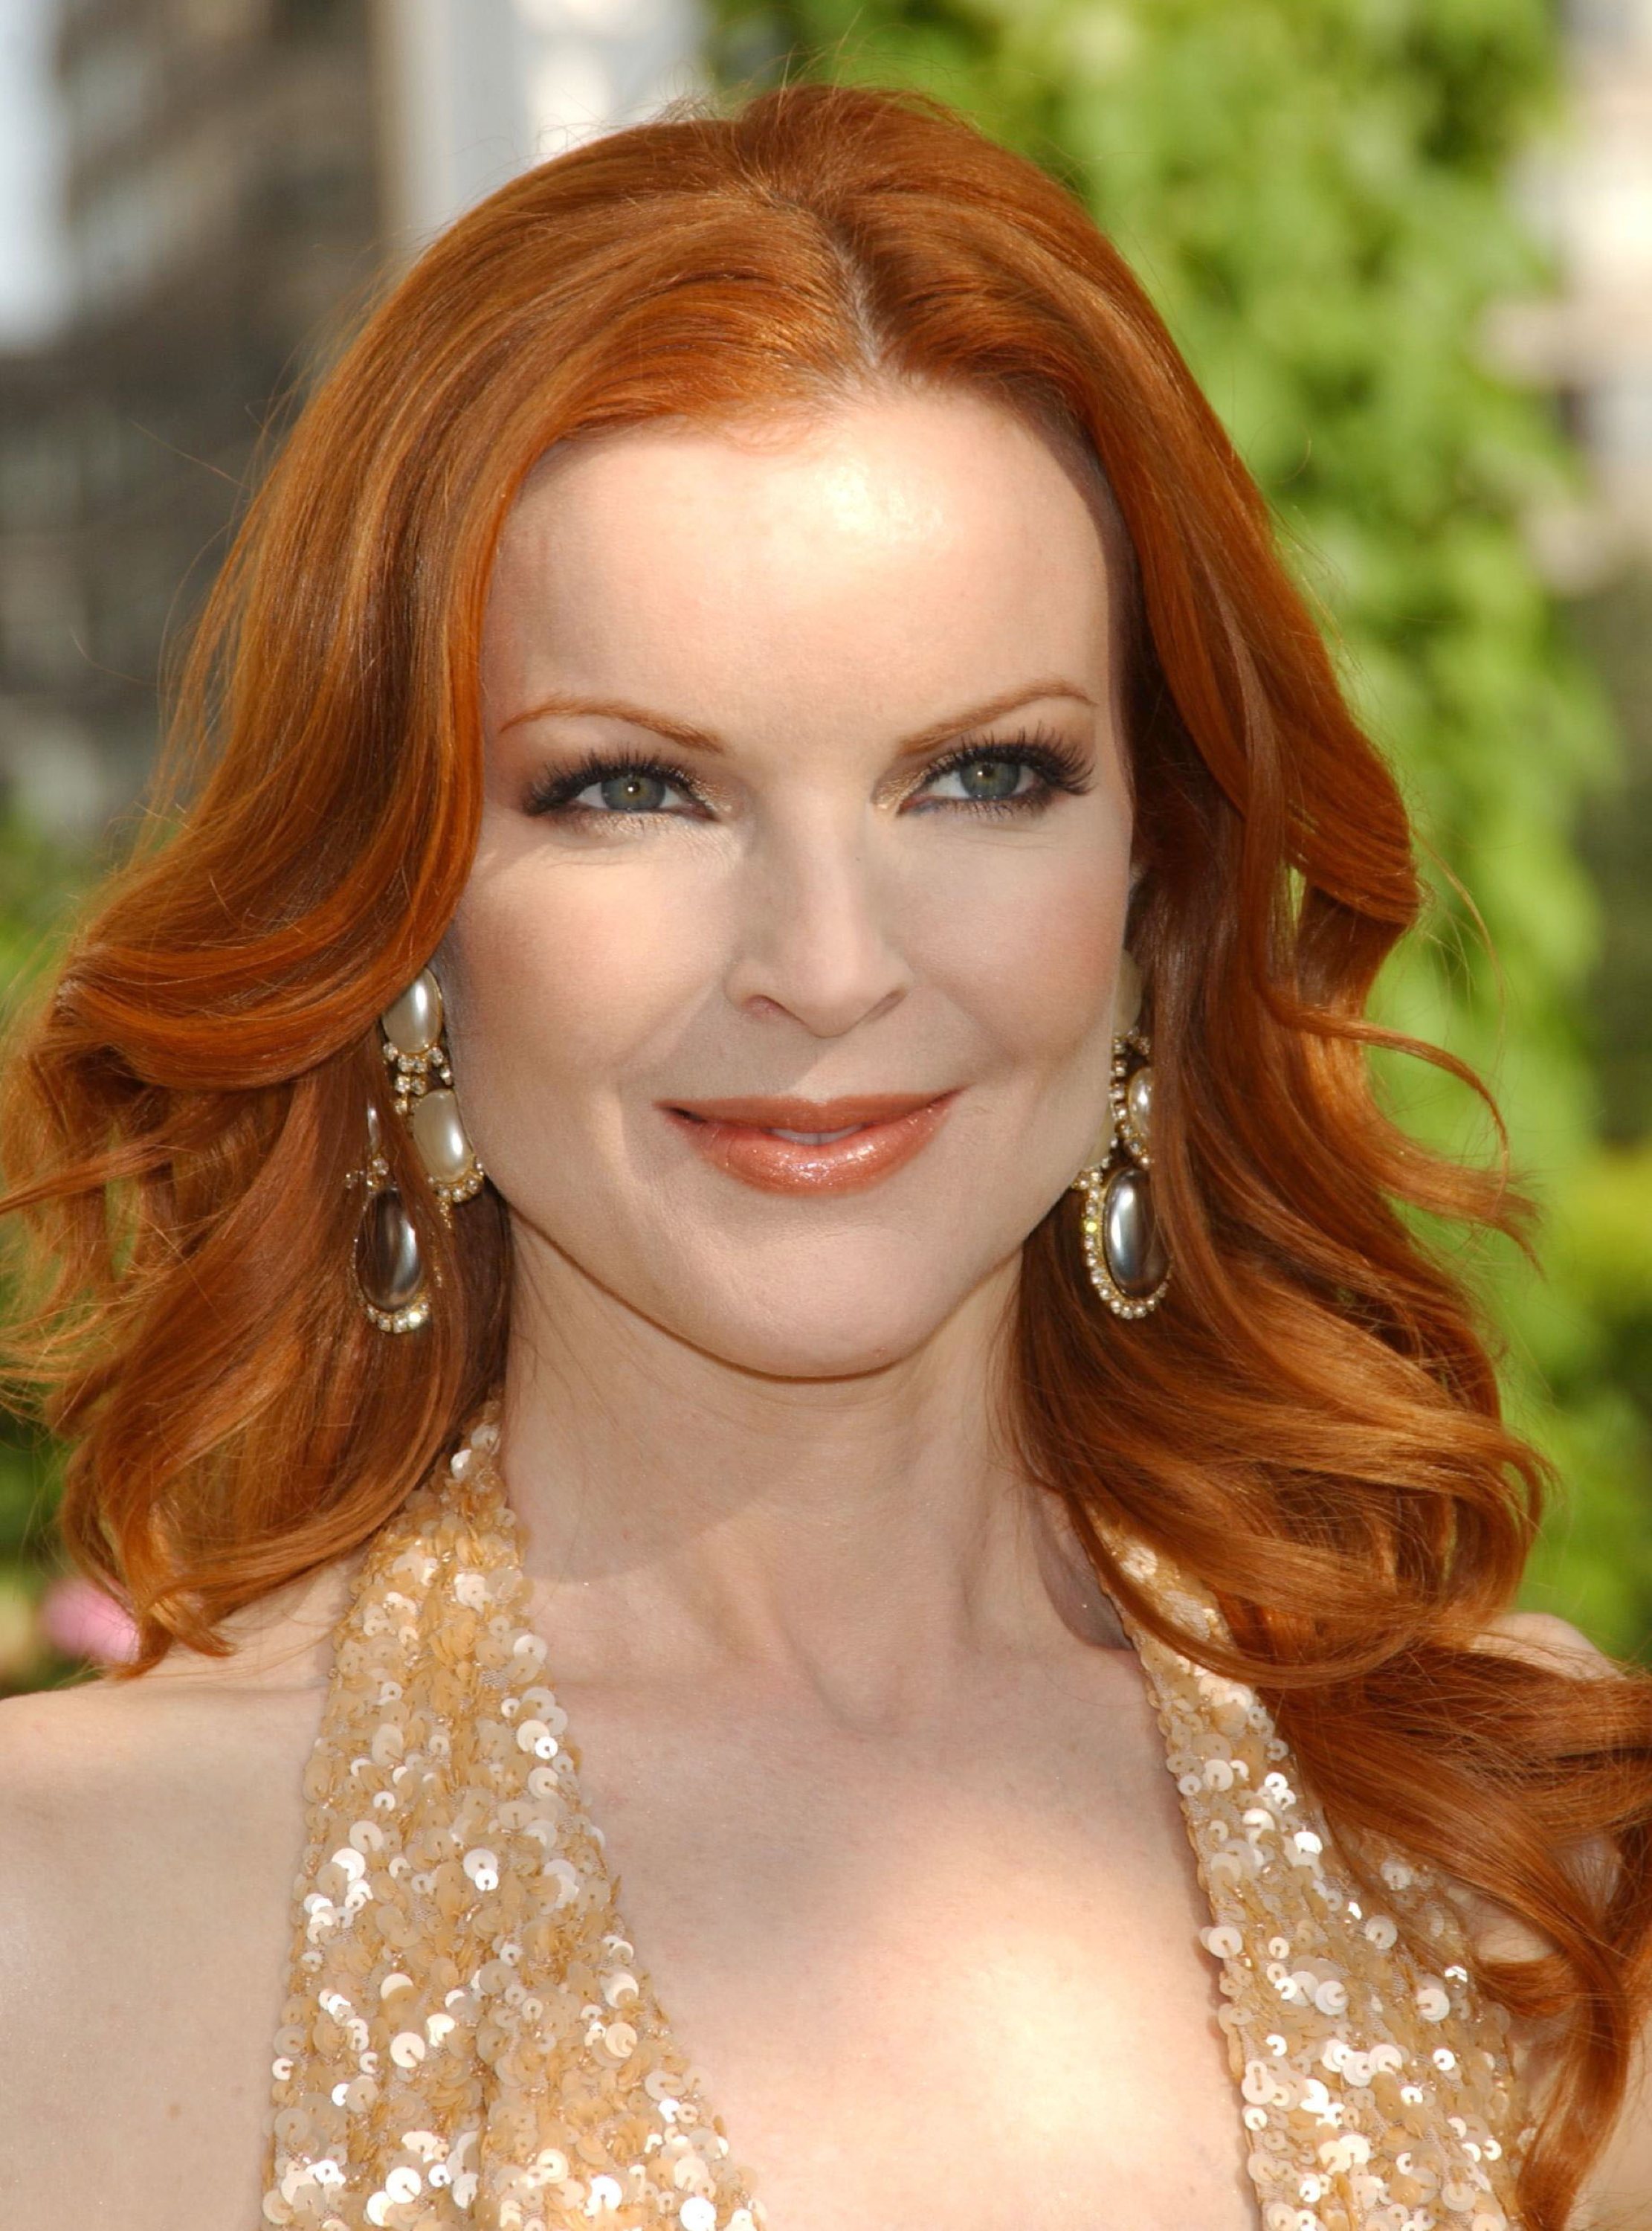 marcia cross, images, image, wallpaper, photos, photo, photograph, gallery,...